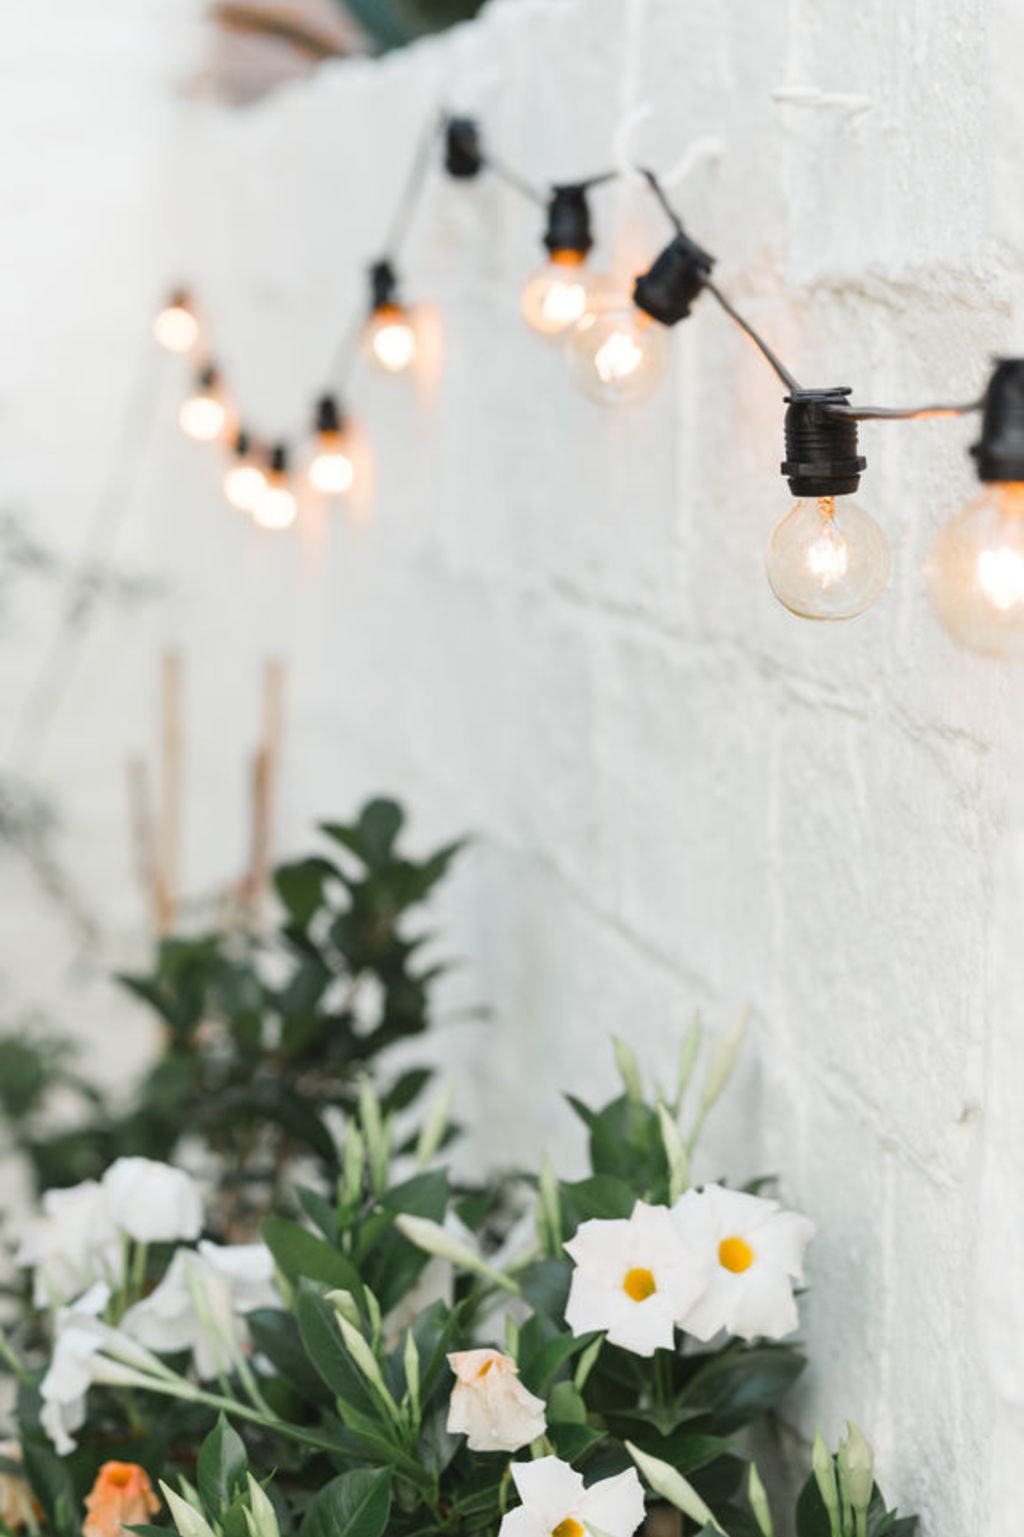 Lighting is an often forgotten element in our outdoor areas, but getting it right means making the most of the warm months. Photo: Stocksy